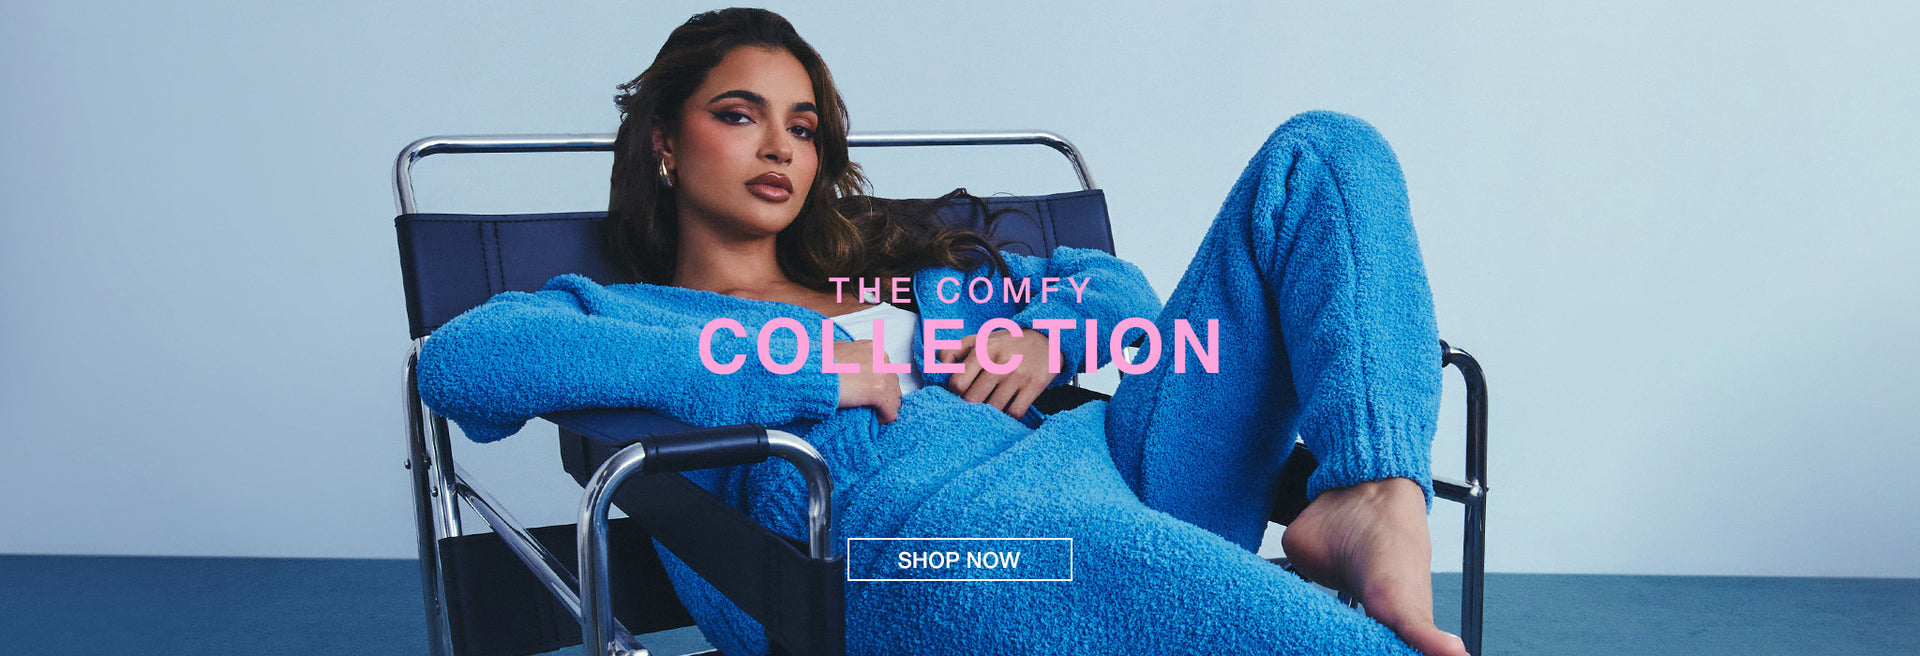 COZY COLLECTION - 10.3.23 - JRS BANNER